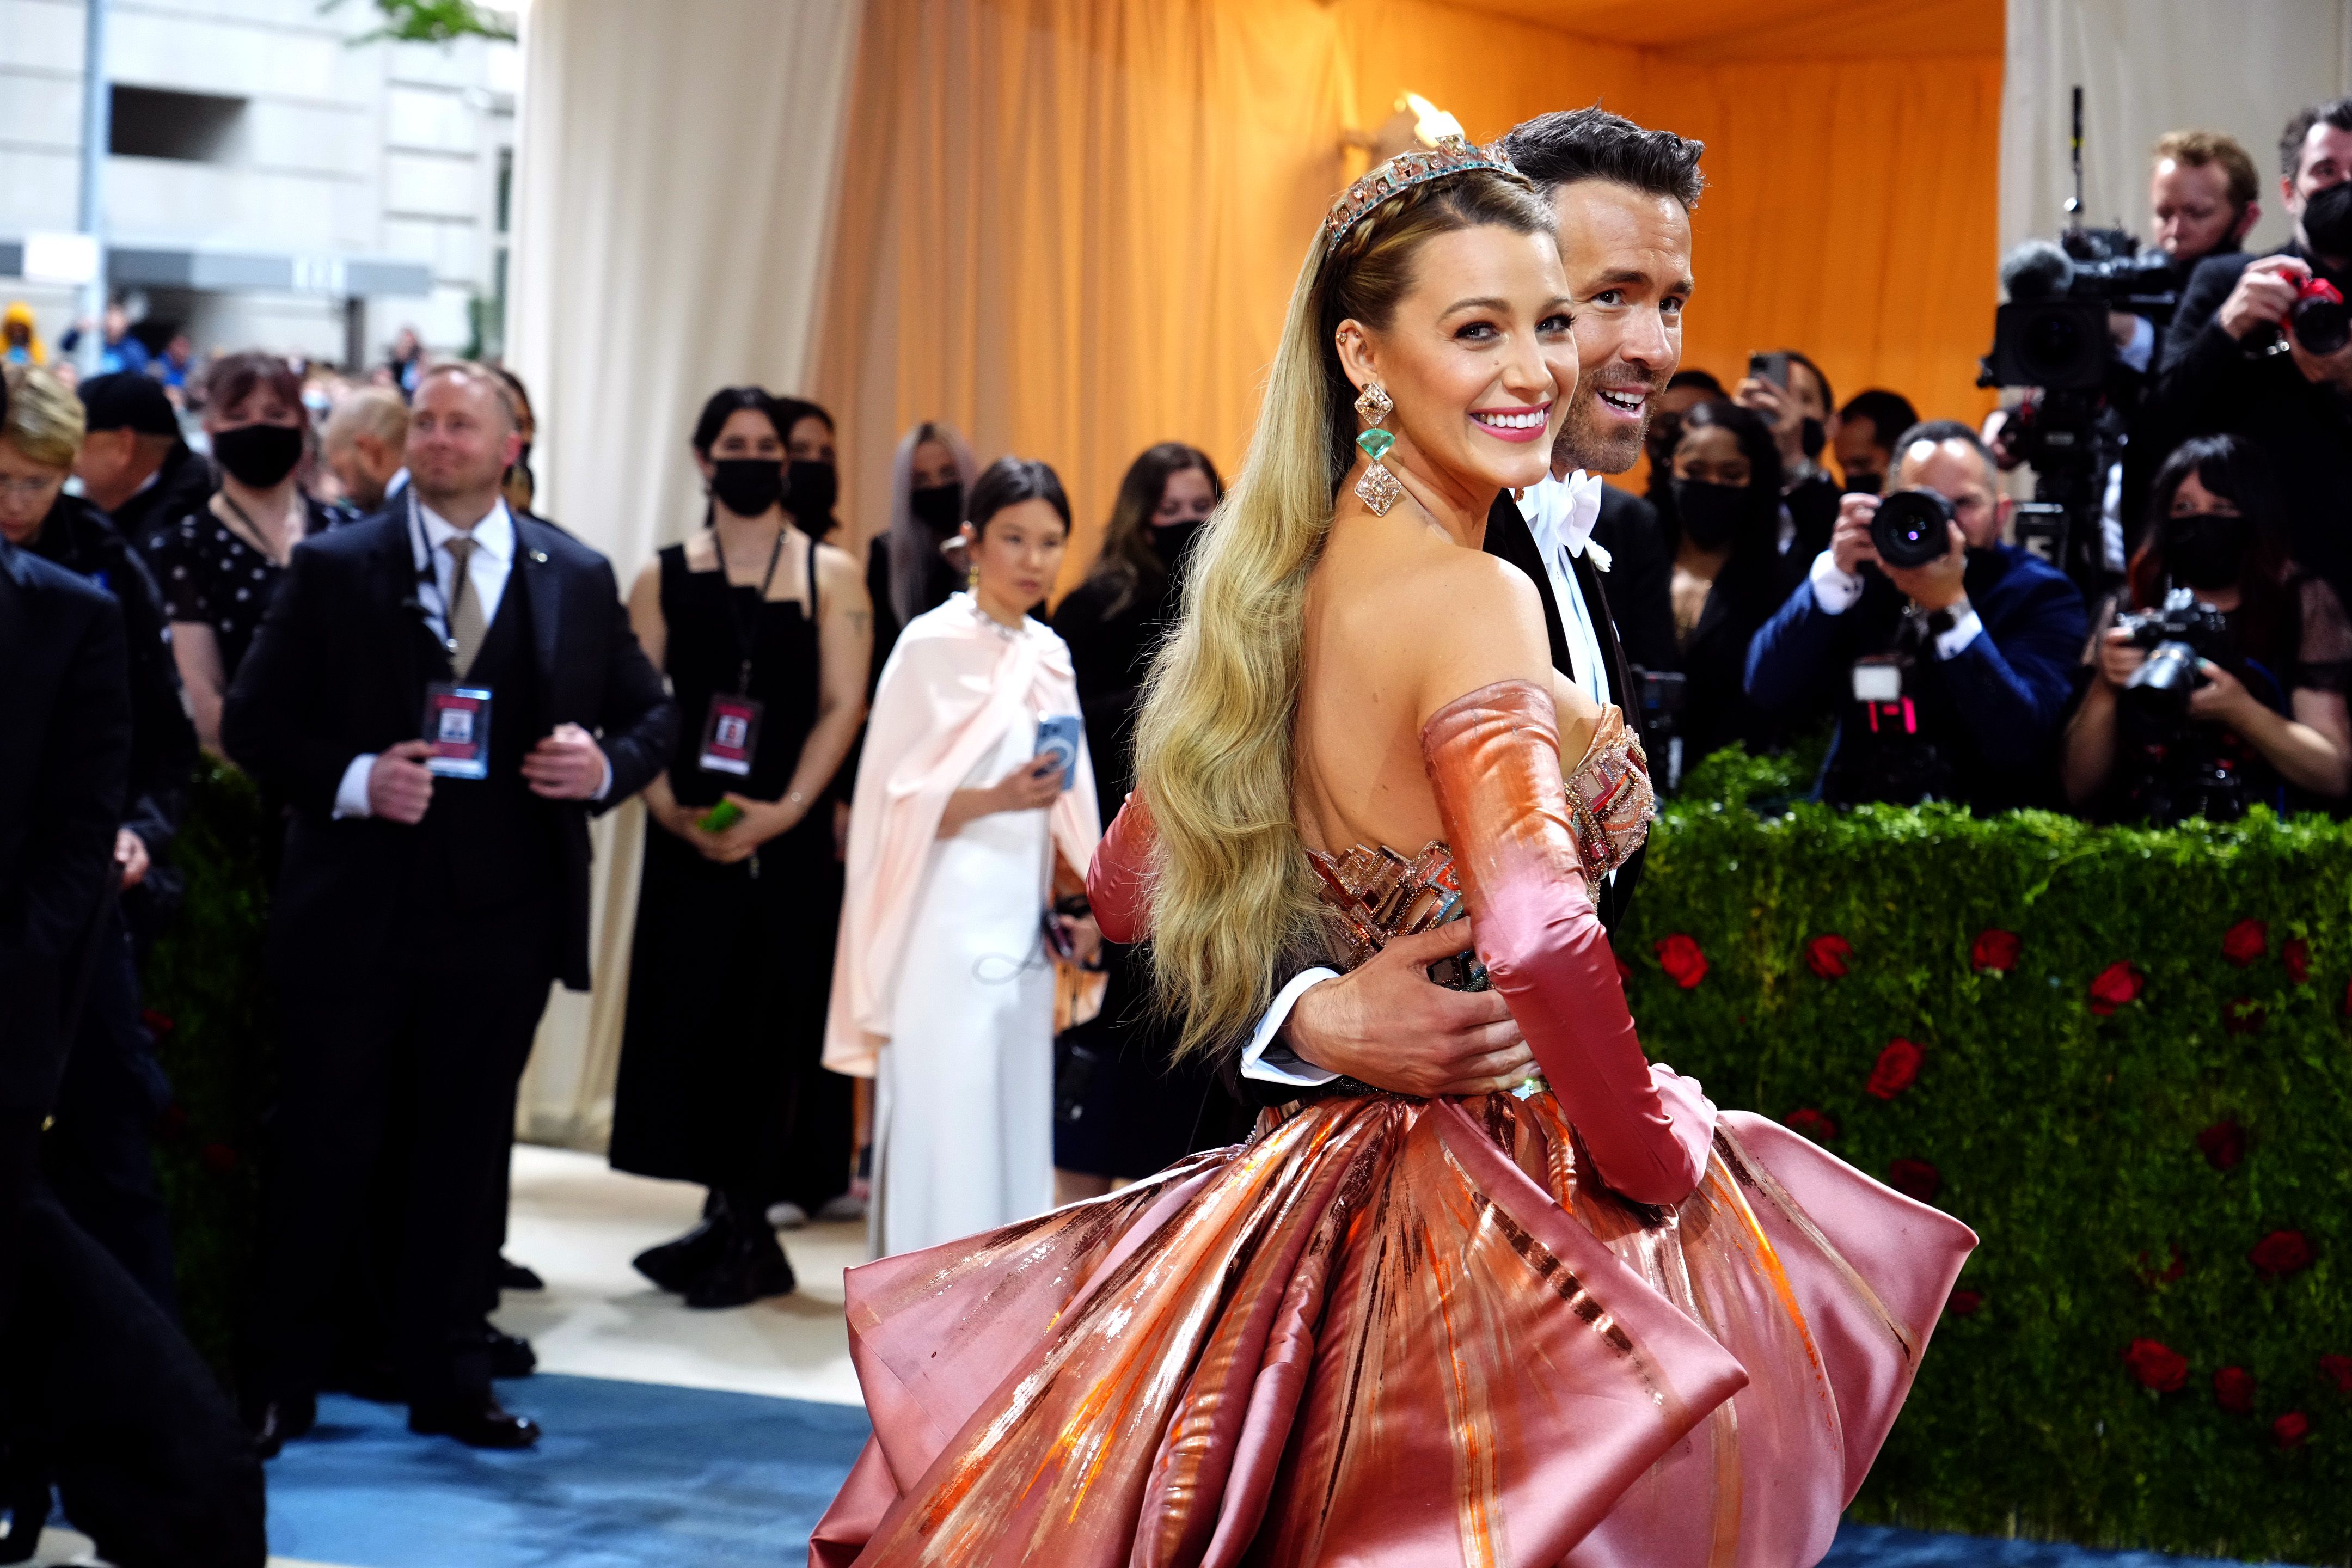 Blake Lively's Met Gala 2022 Dress: Photos Of Her Look – Hollywood Life